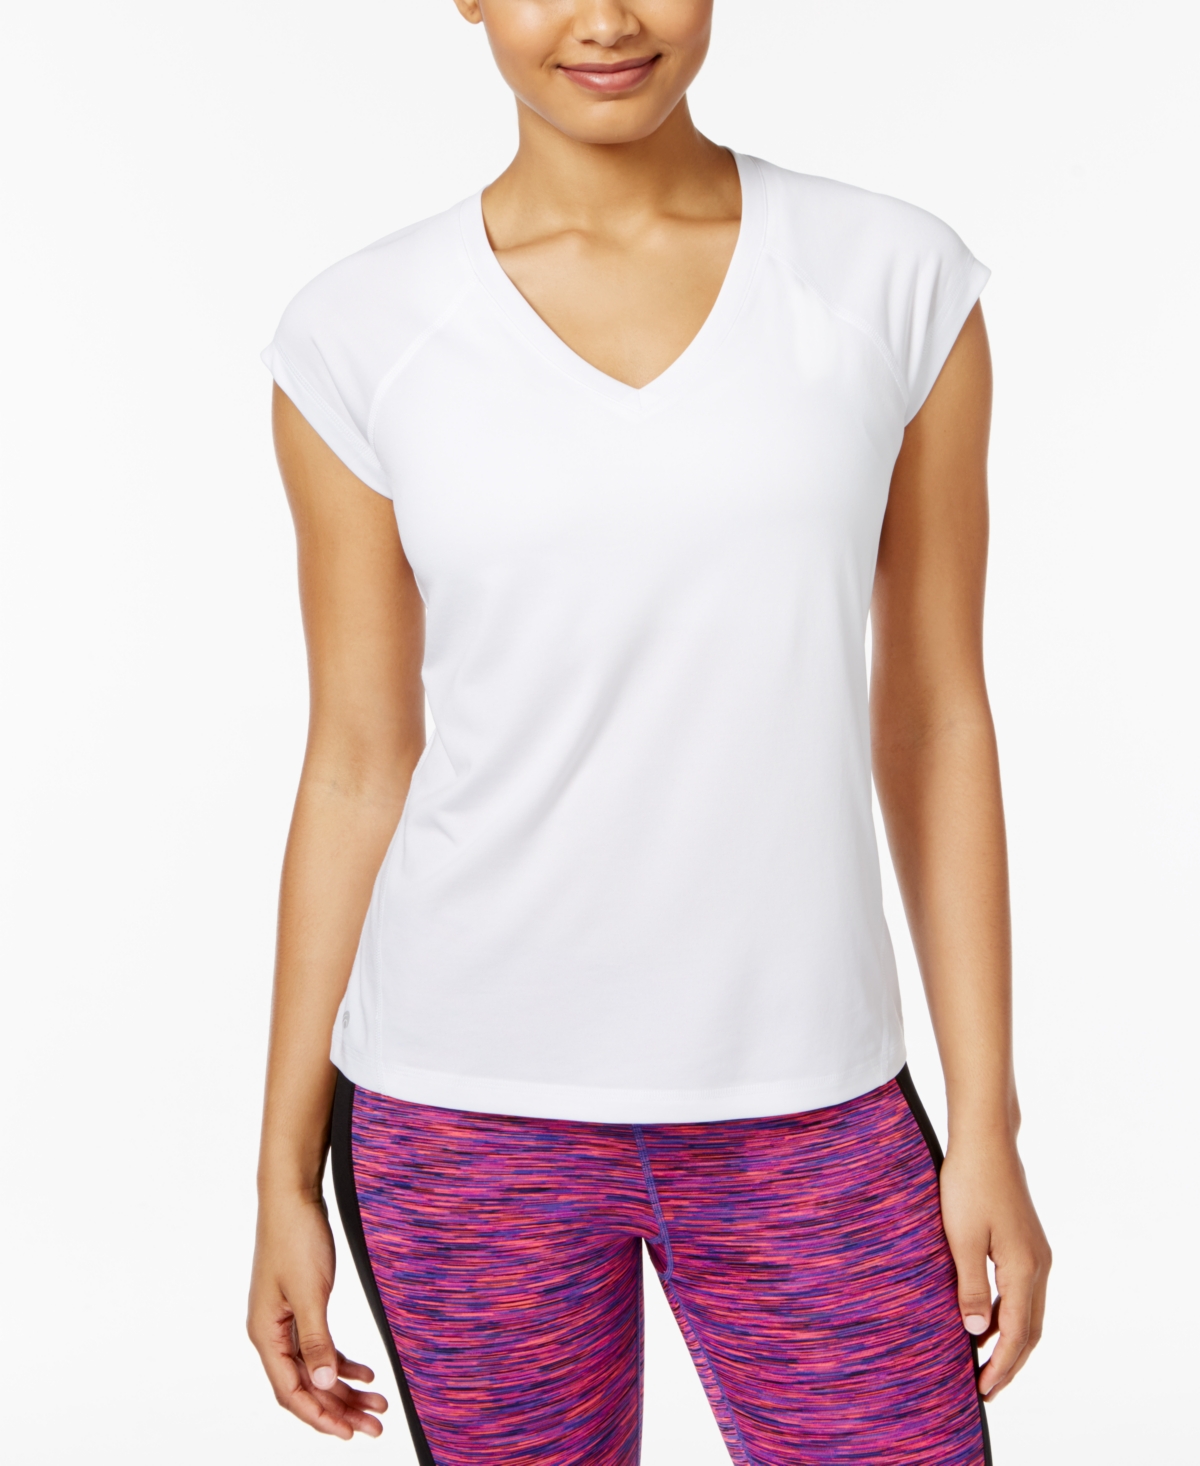 Women's Essentials Rapidry Heathered Performance T-Shirt, Created for Macy's - Bright White